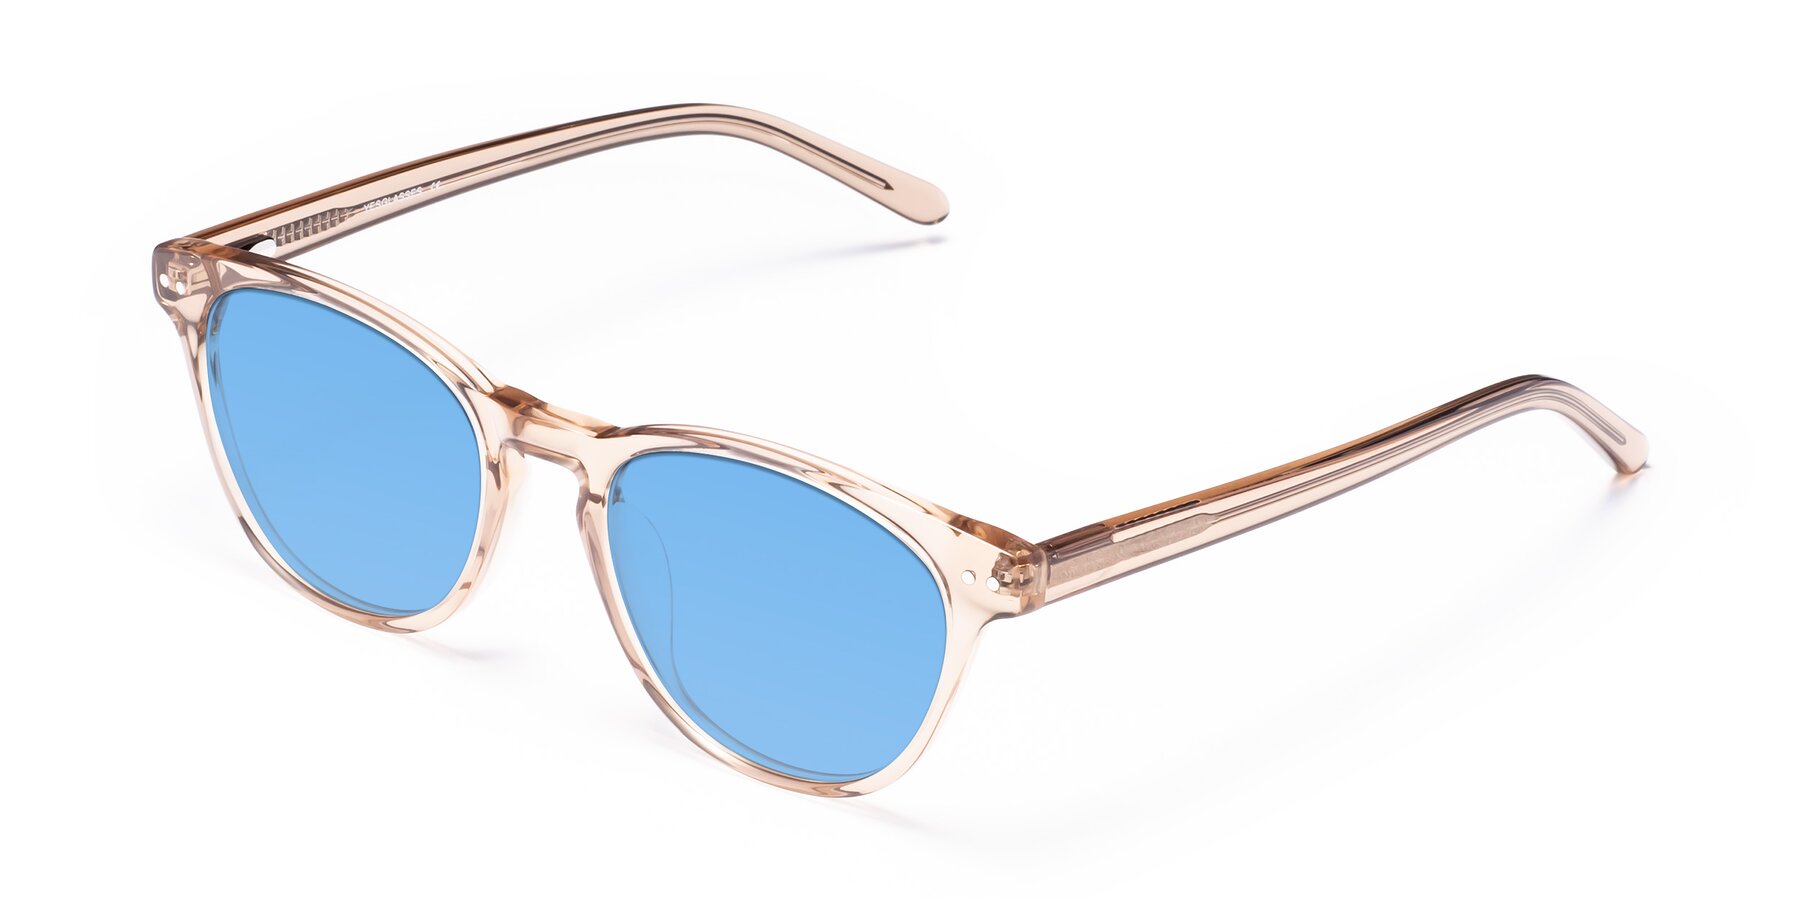 Angle of Blaze in light Brown with Medium Blue Tinted Lenses